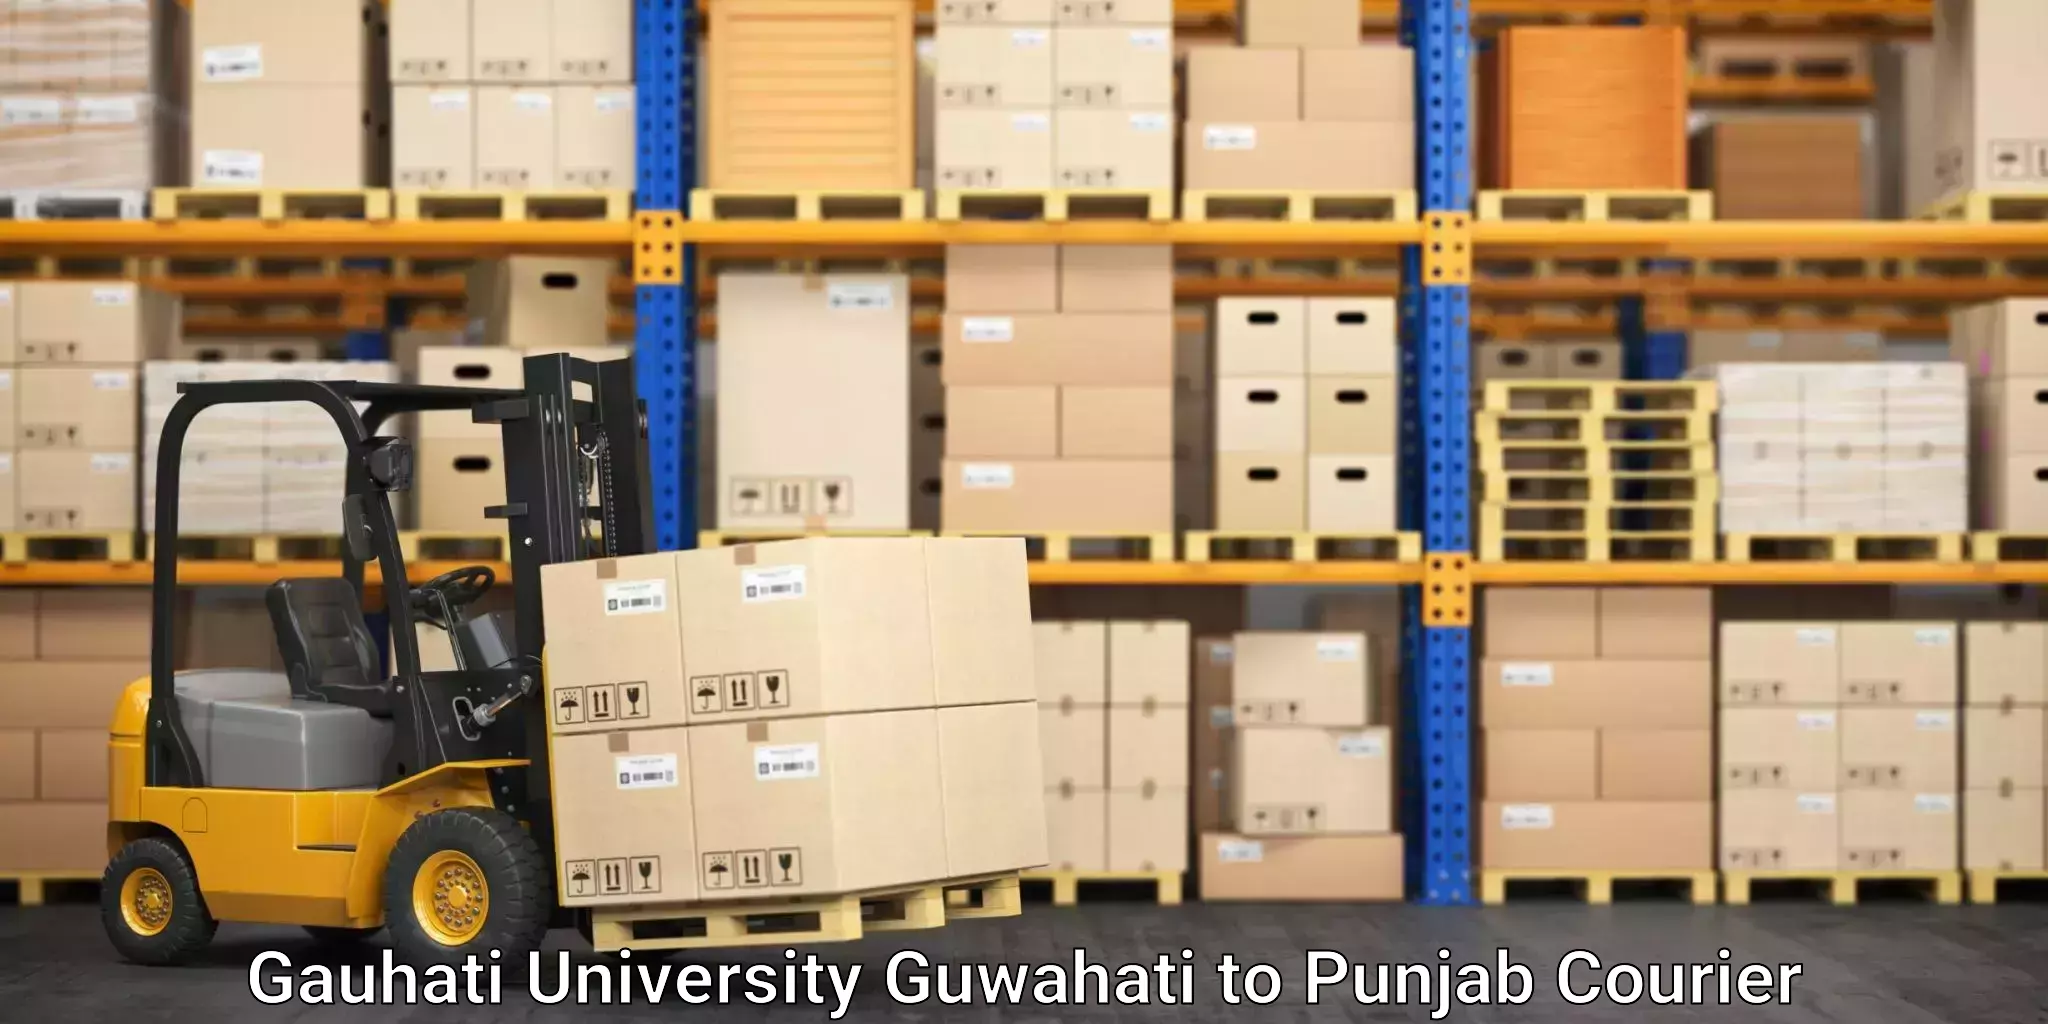 Overnight delivery services Gauhati University Guwahati to Patiala